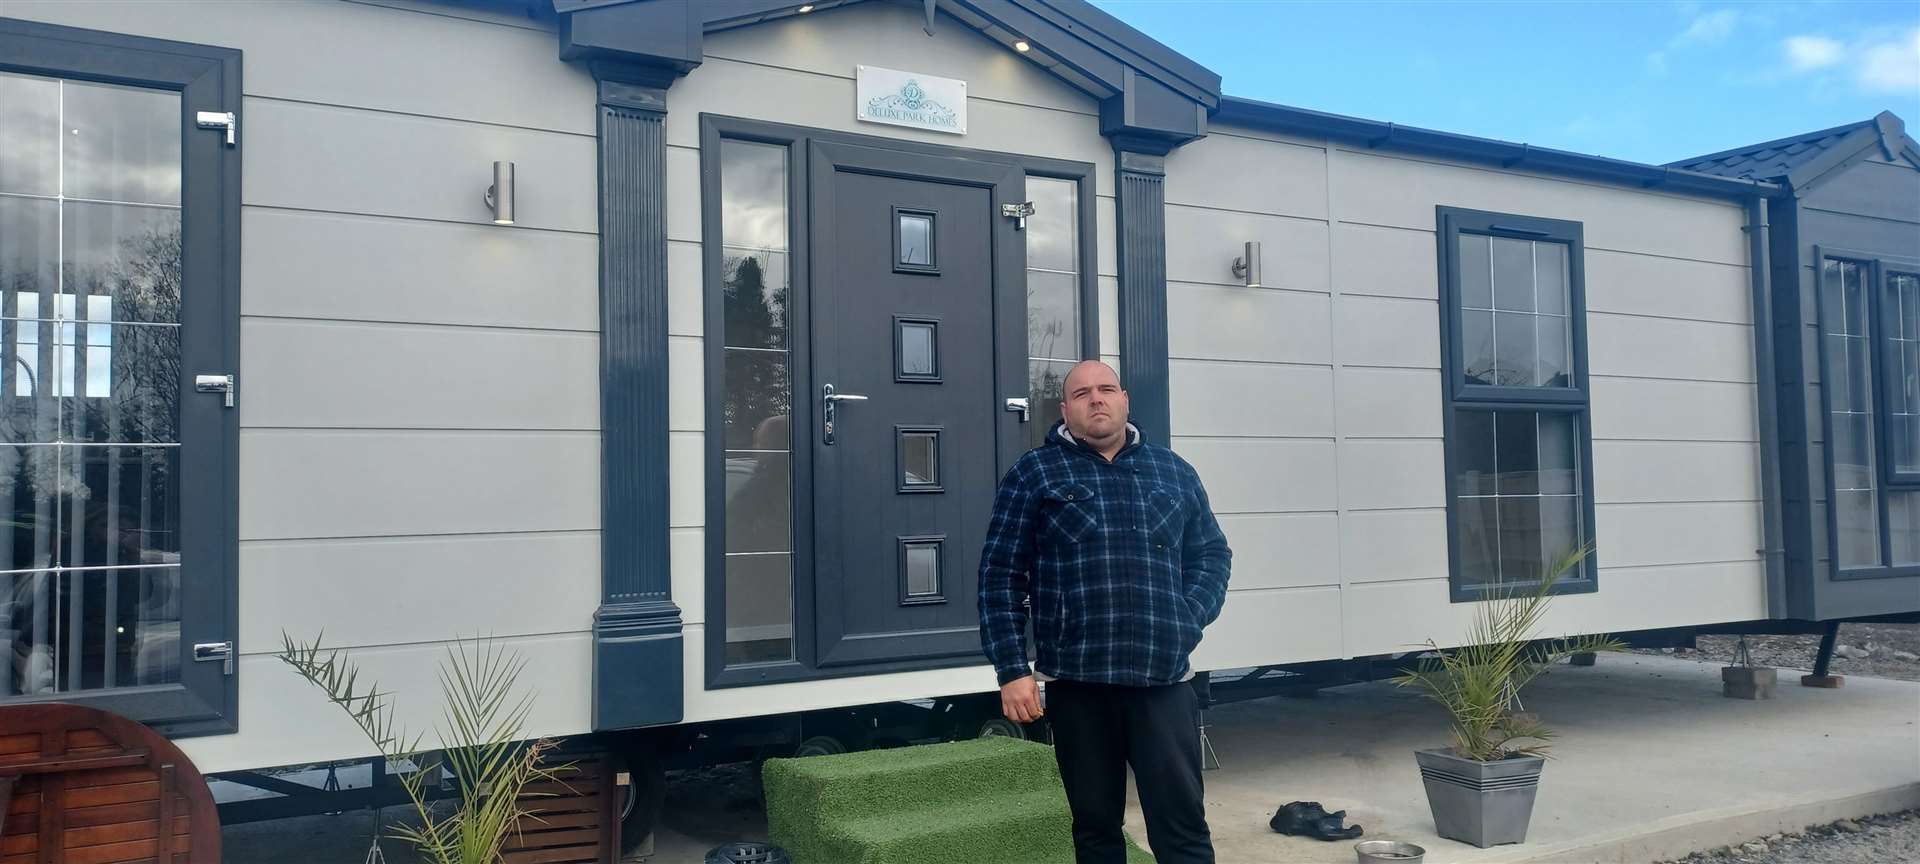 Traveller James Golby says he is now sleeping in his truck after his mobile home was taken away